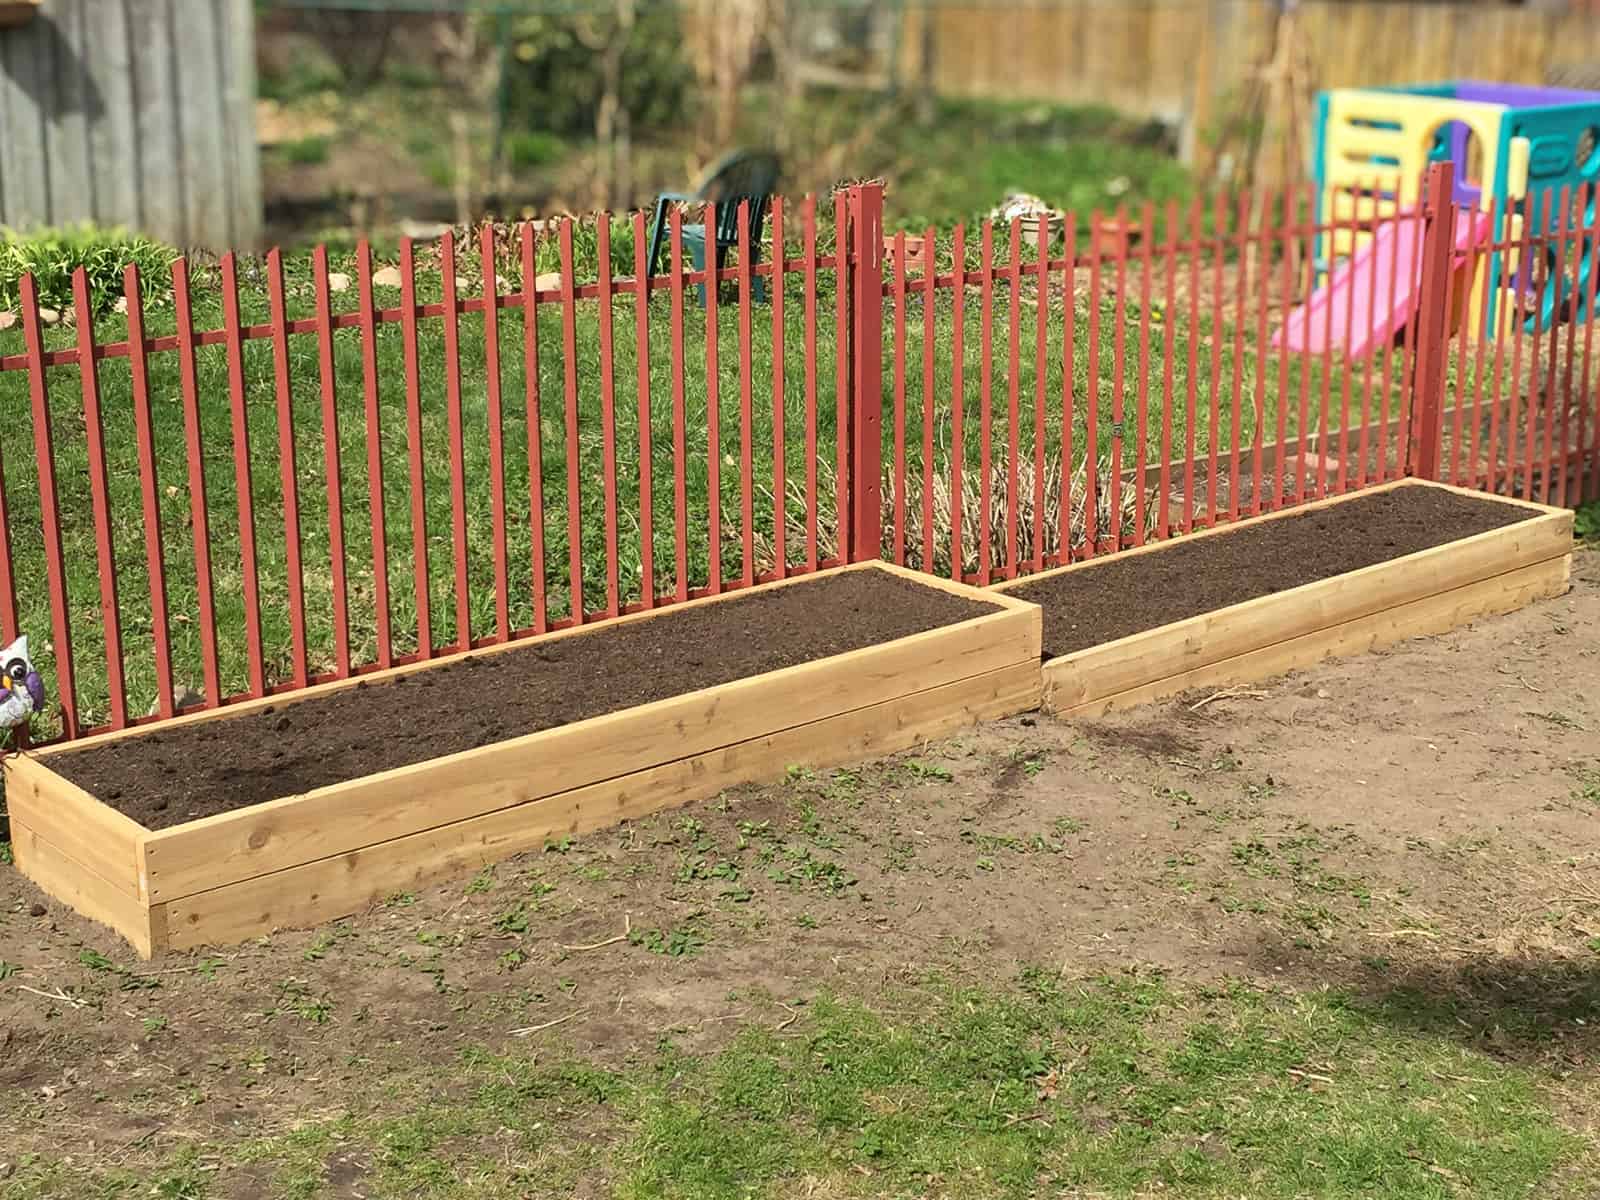 An image of two raised garden beds filled with soil but not yet planted.